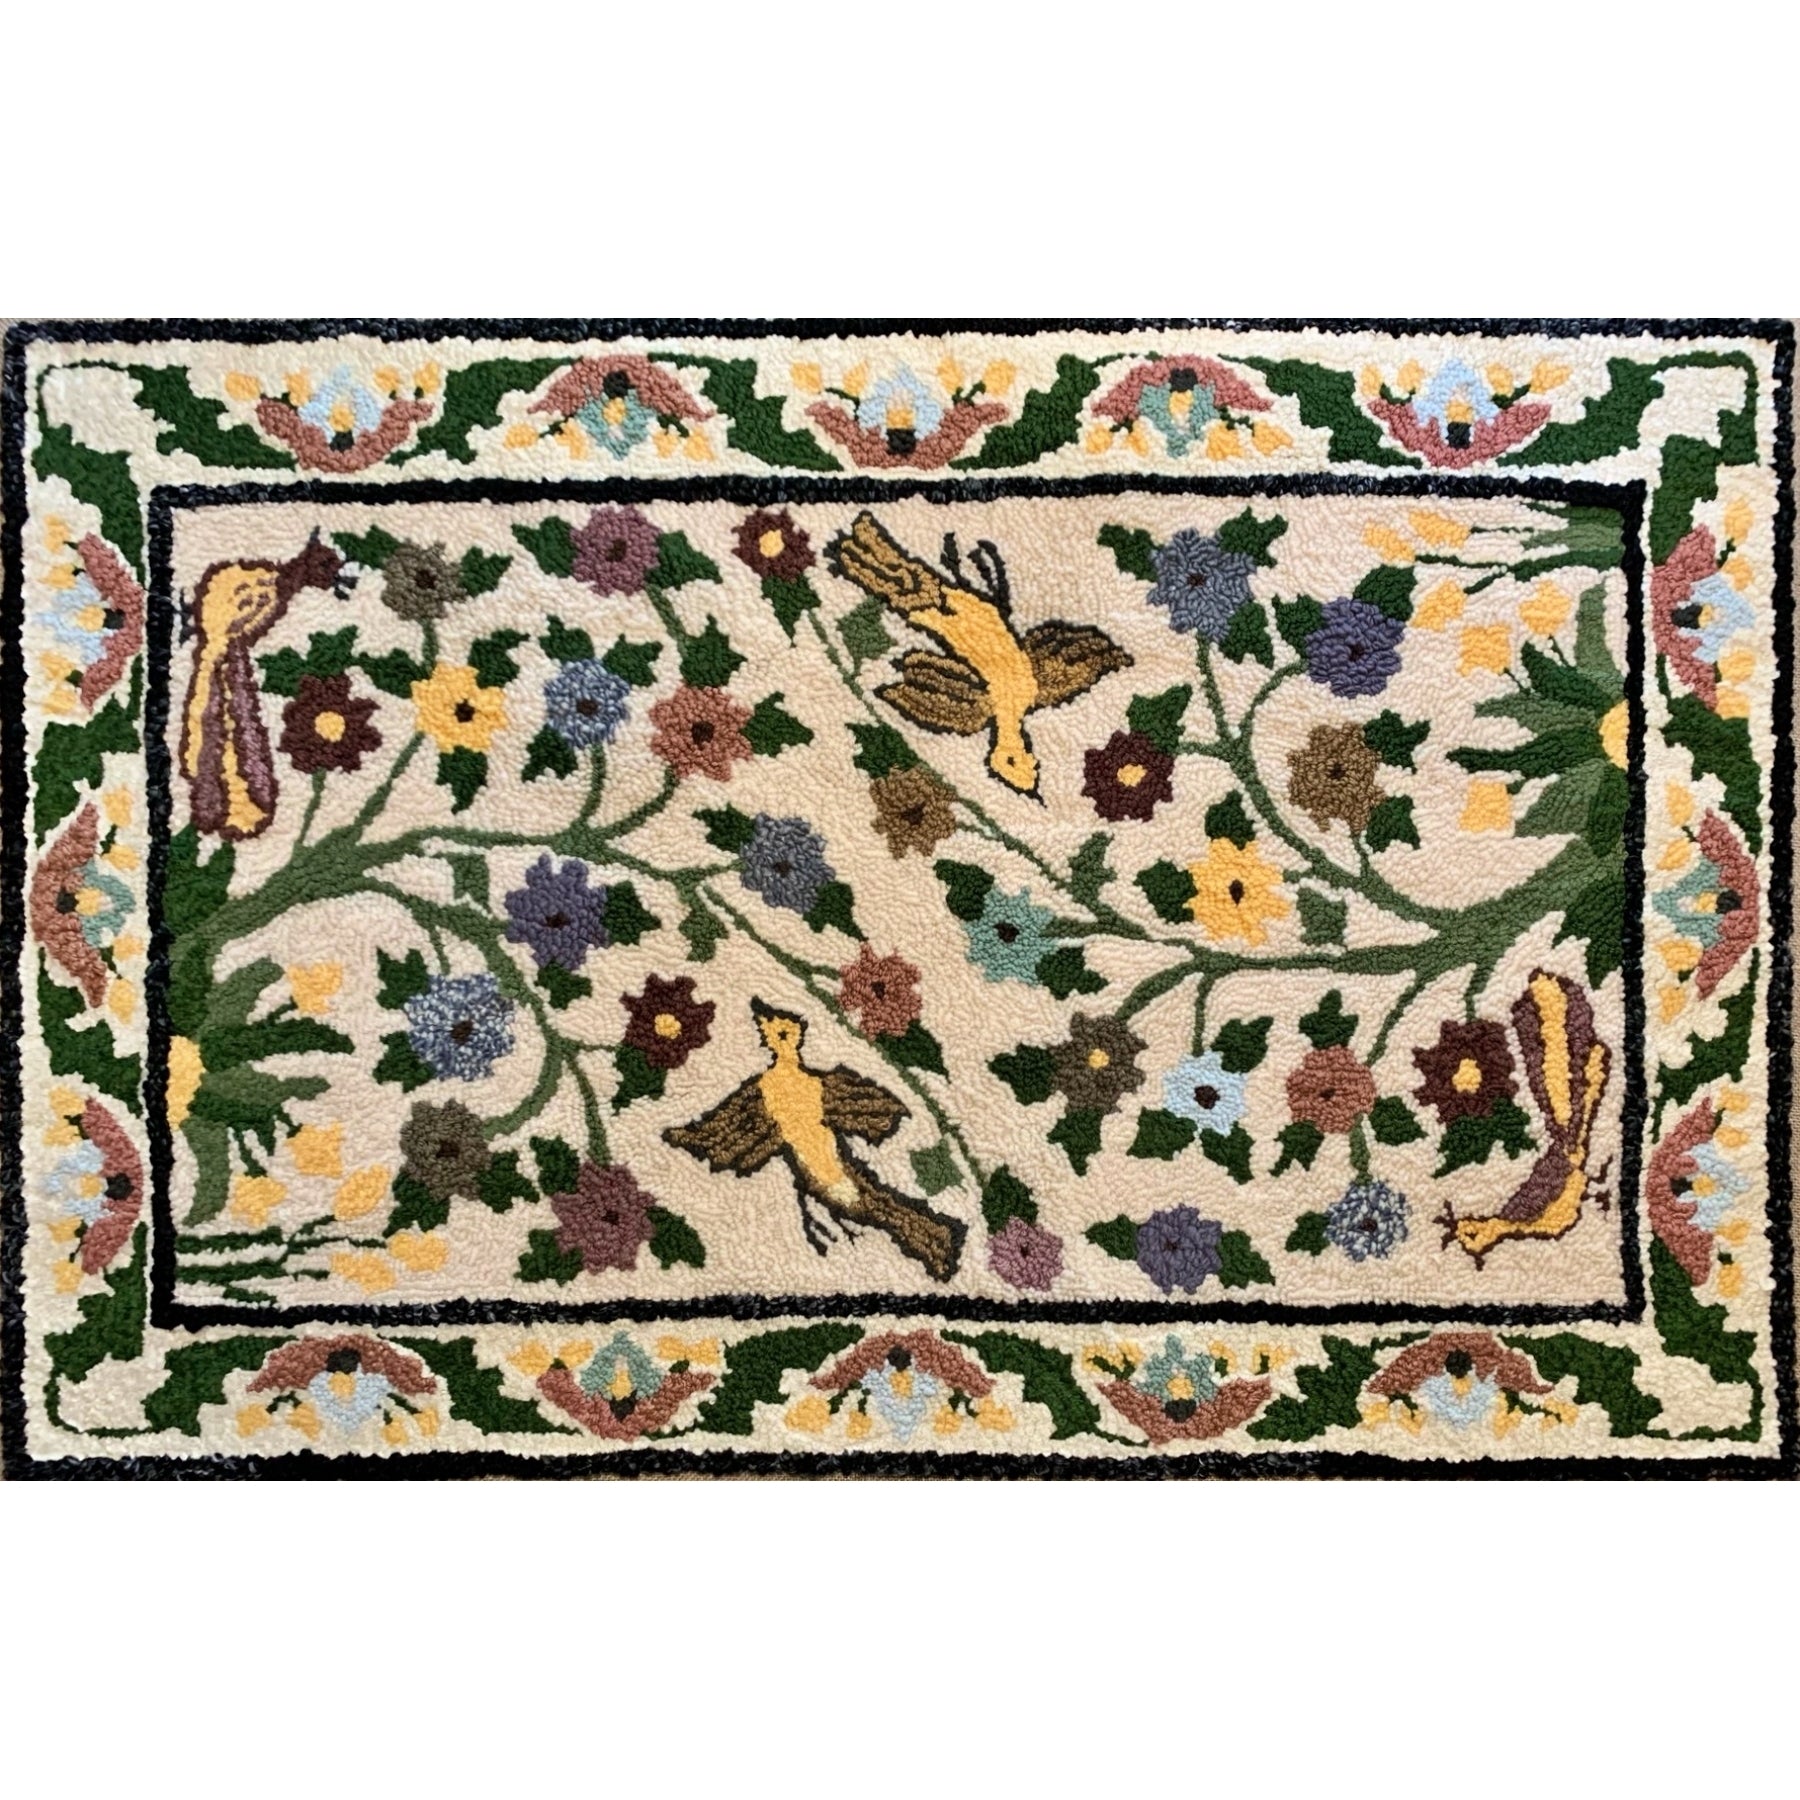 In a Persian Garden, rug hooked by Mary Rowe